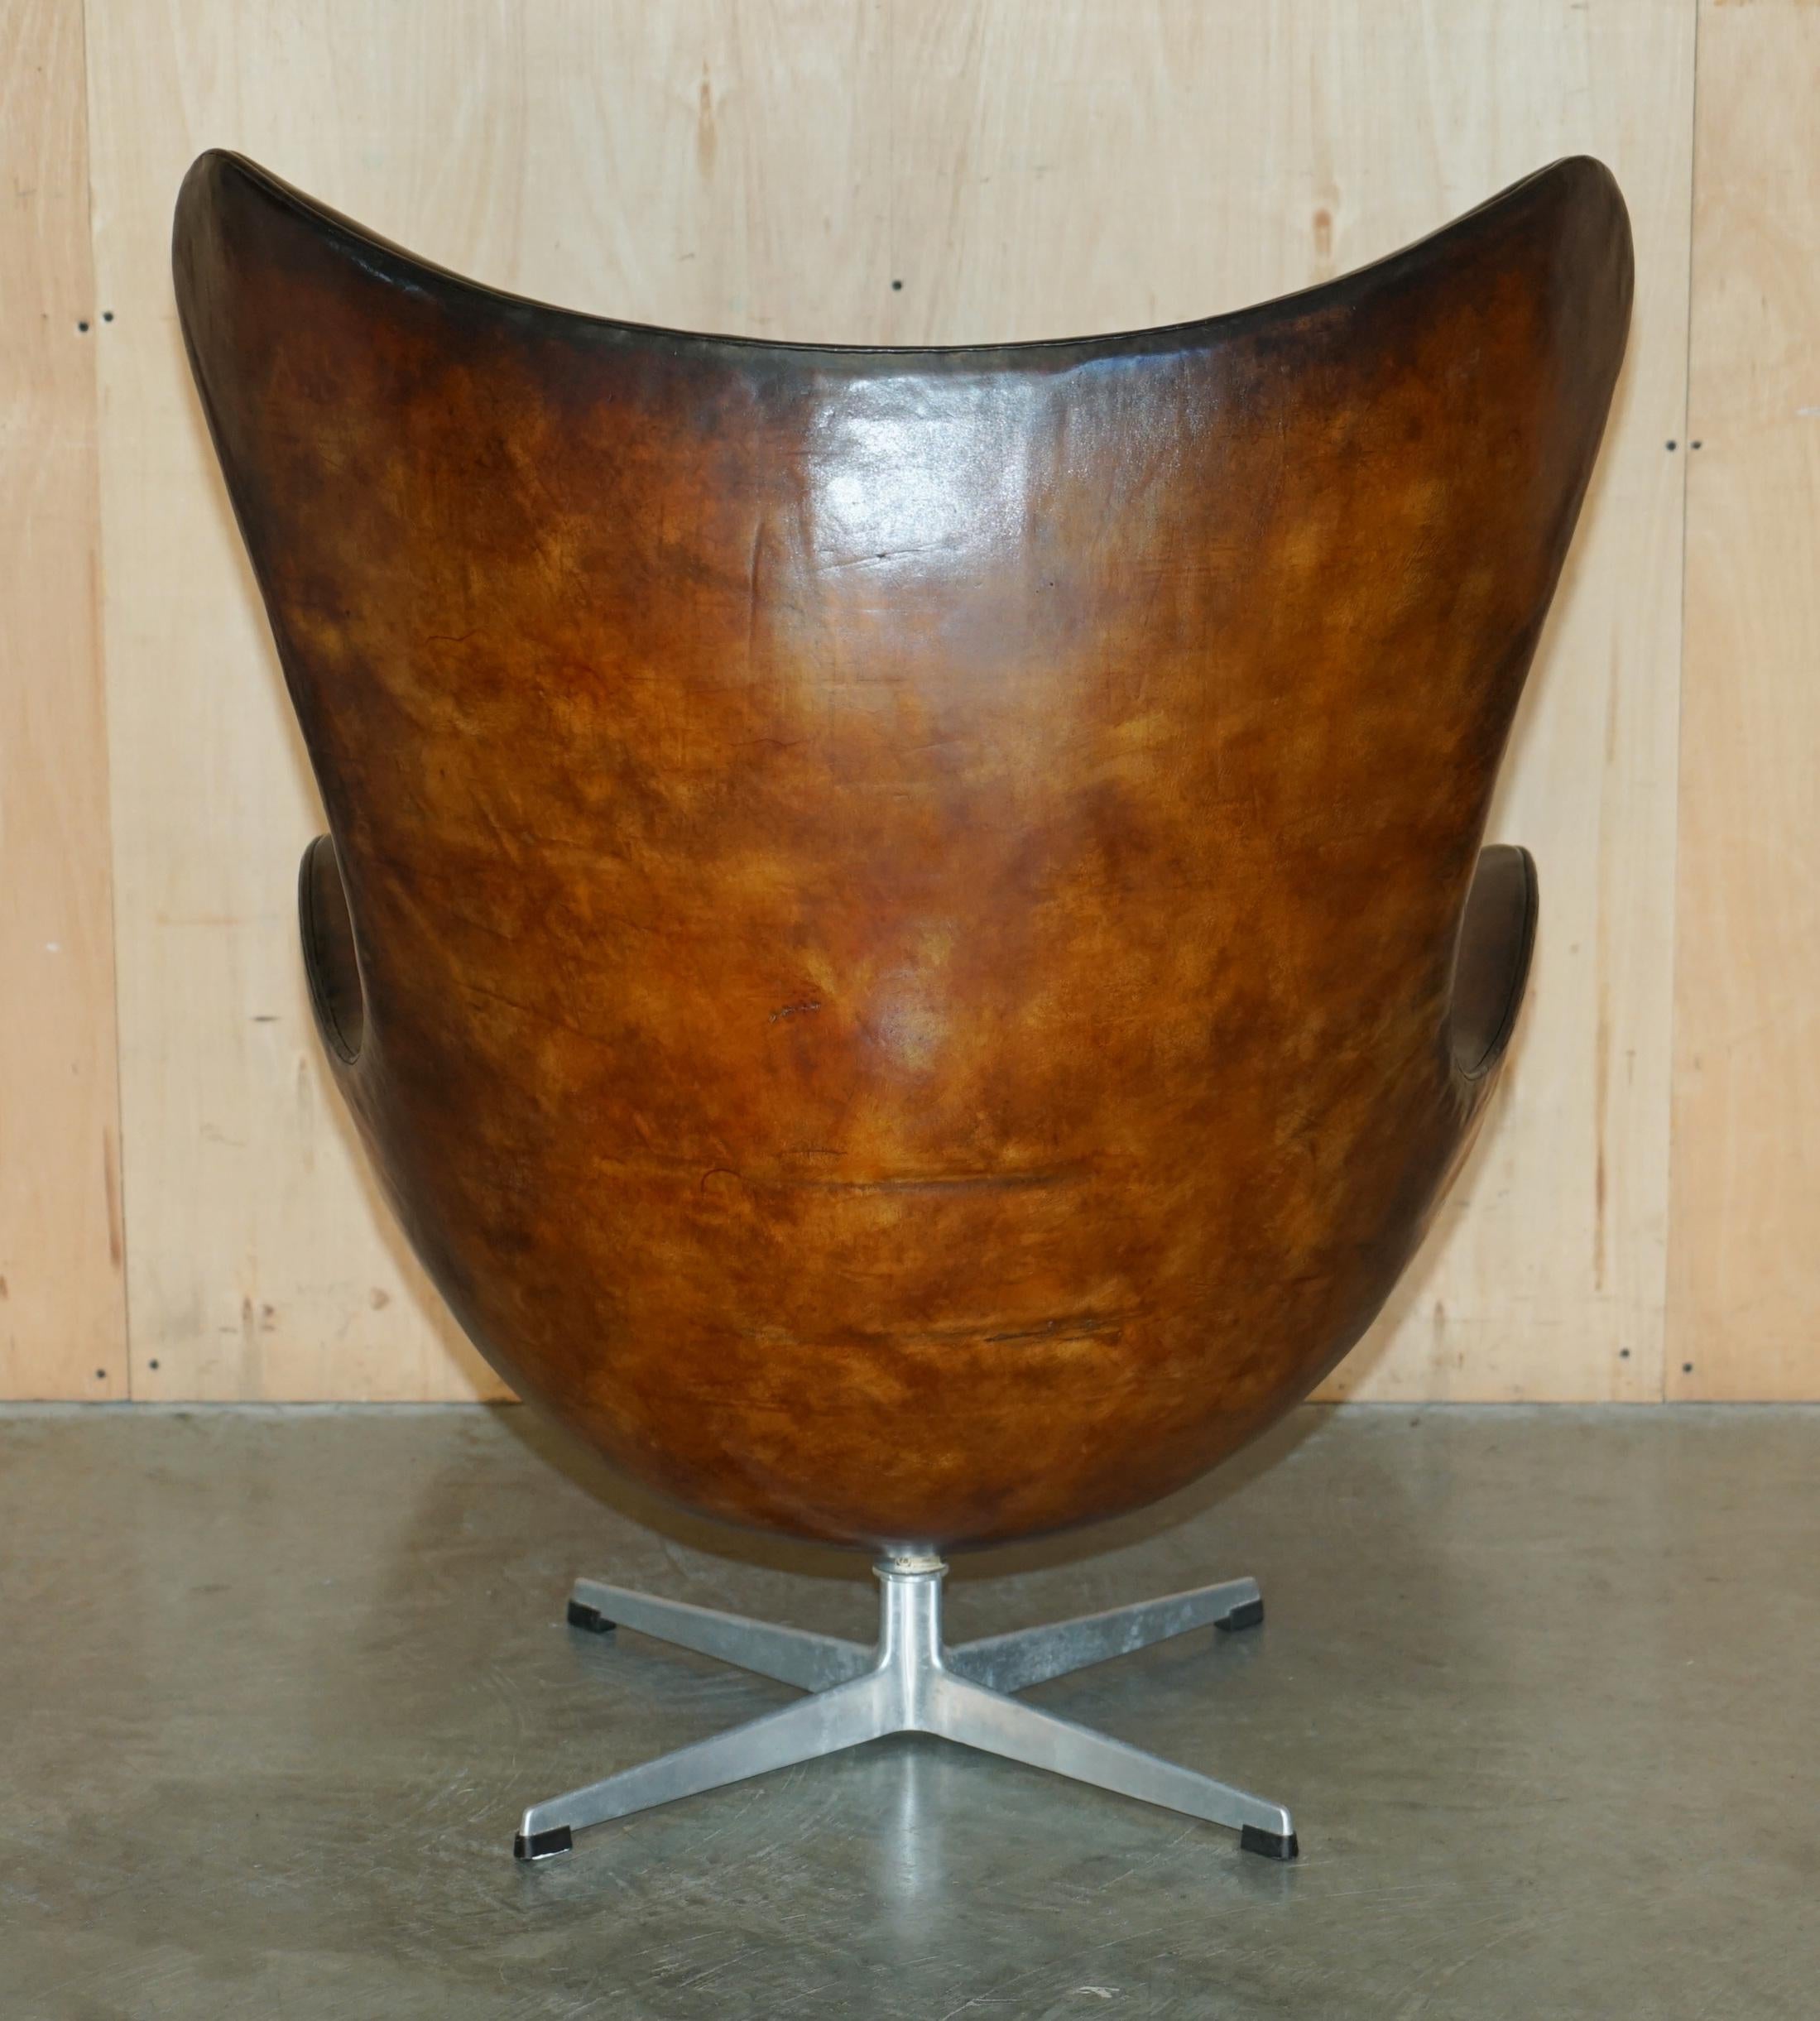 ORIGINAL FULLY RESTORED 1965 FRITZ HANSEN EGG CHAiR & FOOTSTOOL IN BROWN LEATHER For Sale 2